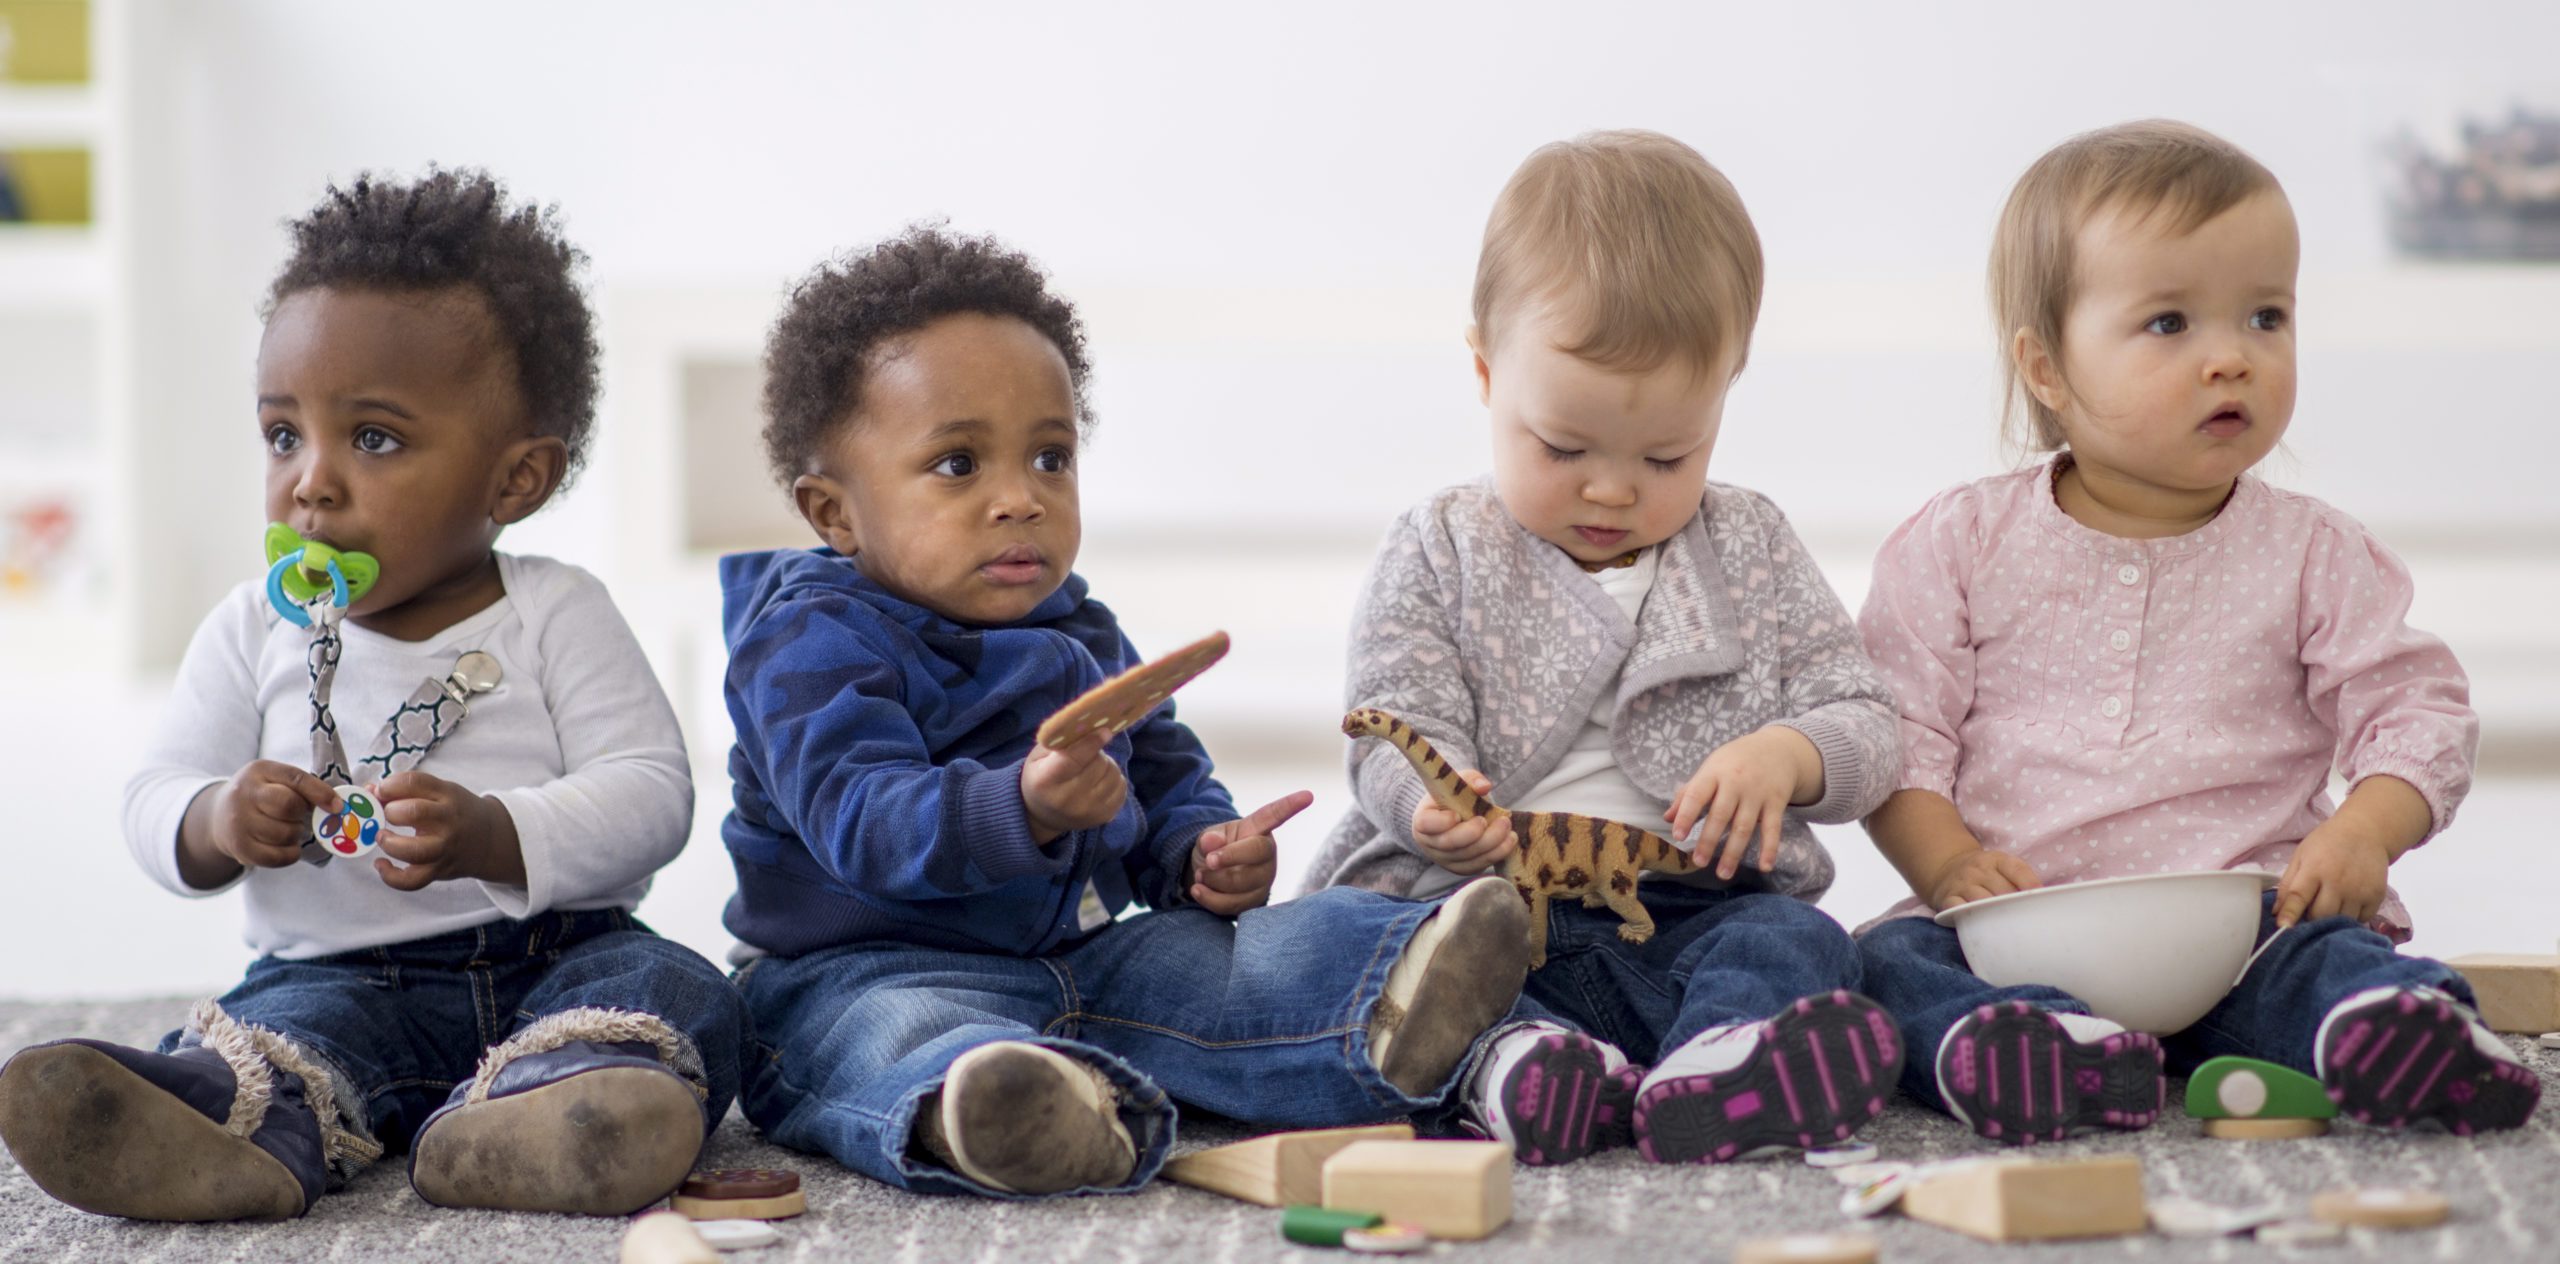 group of toddlers playing together with toys